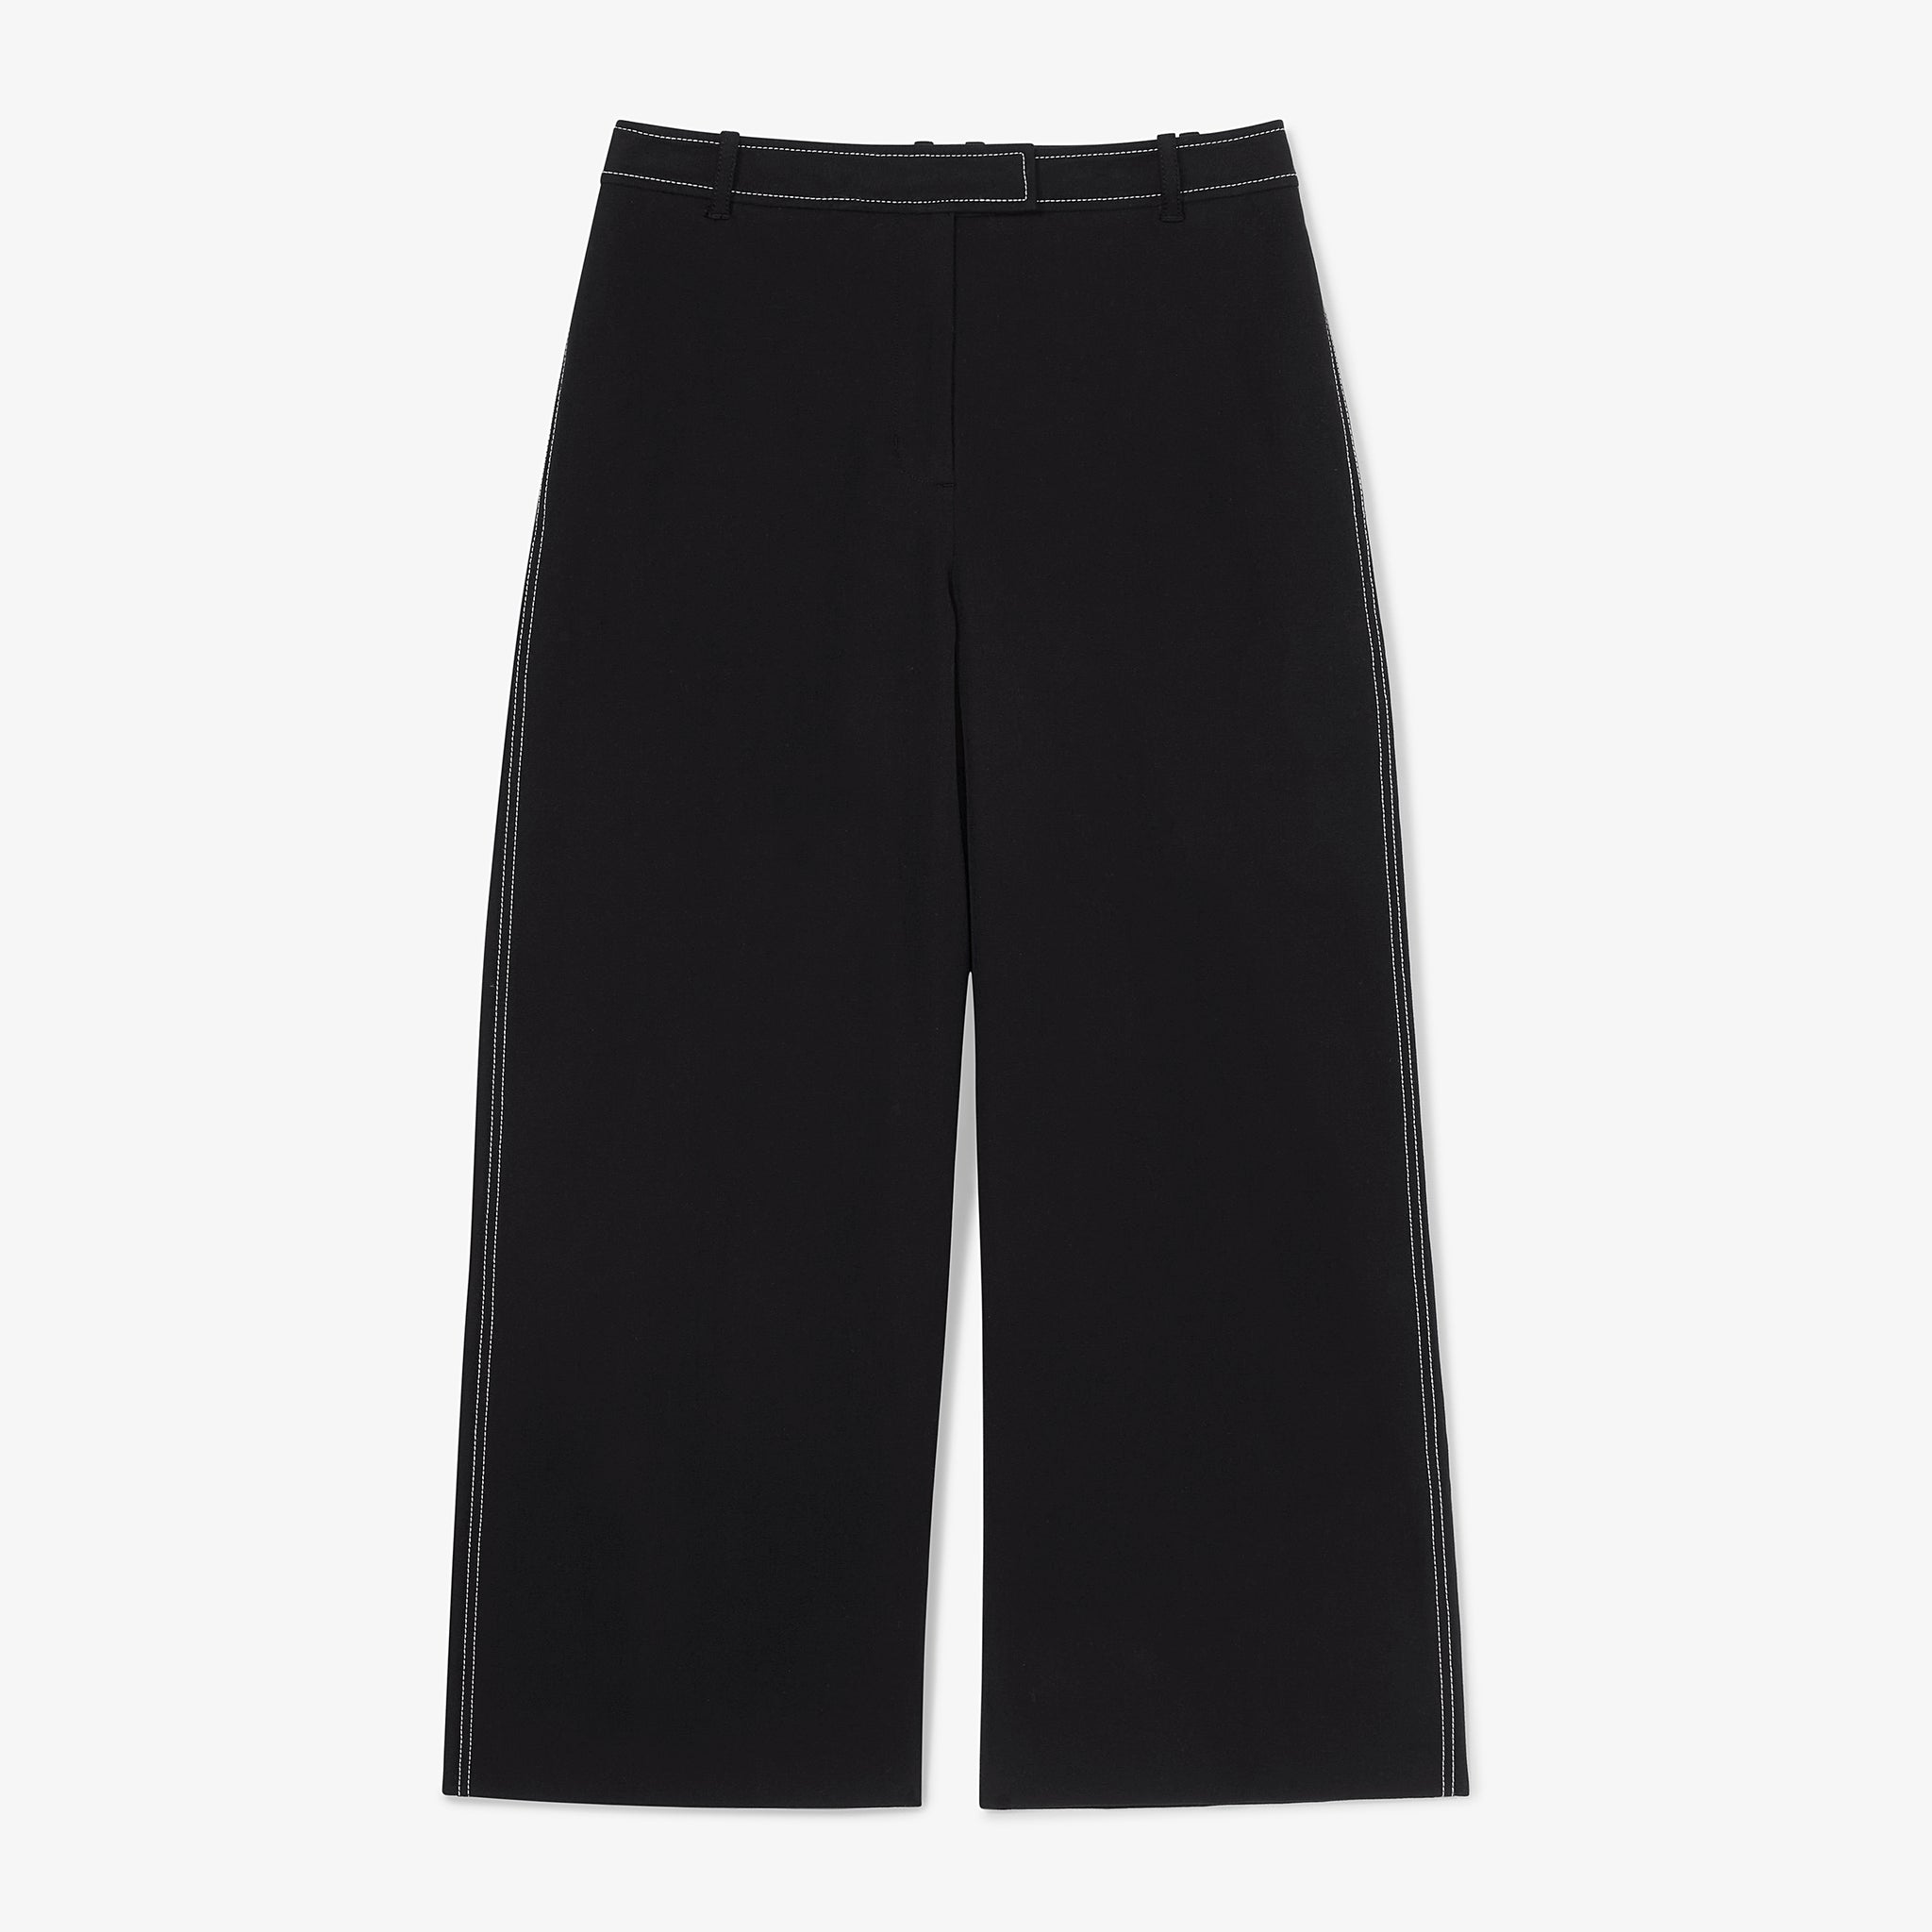 packshot image of the abby pant in black